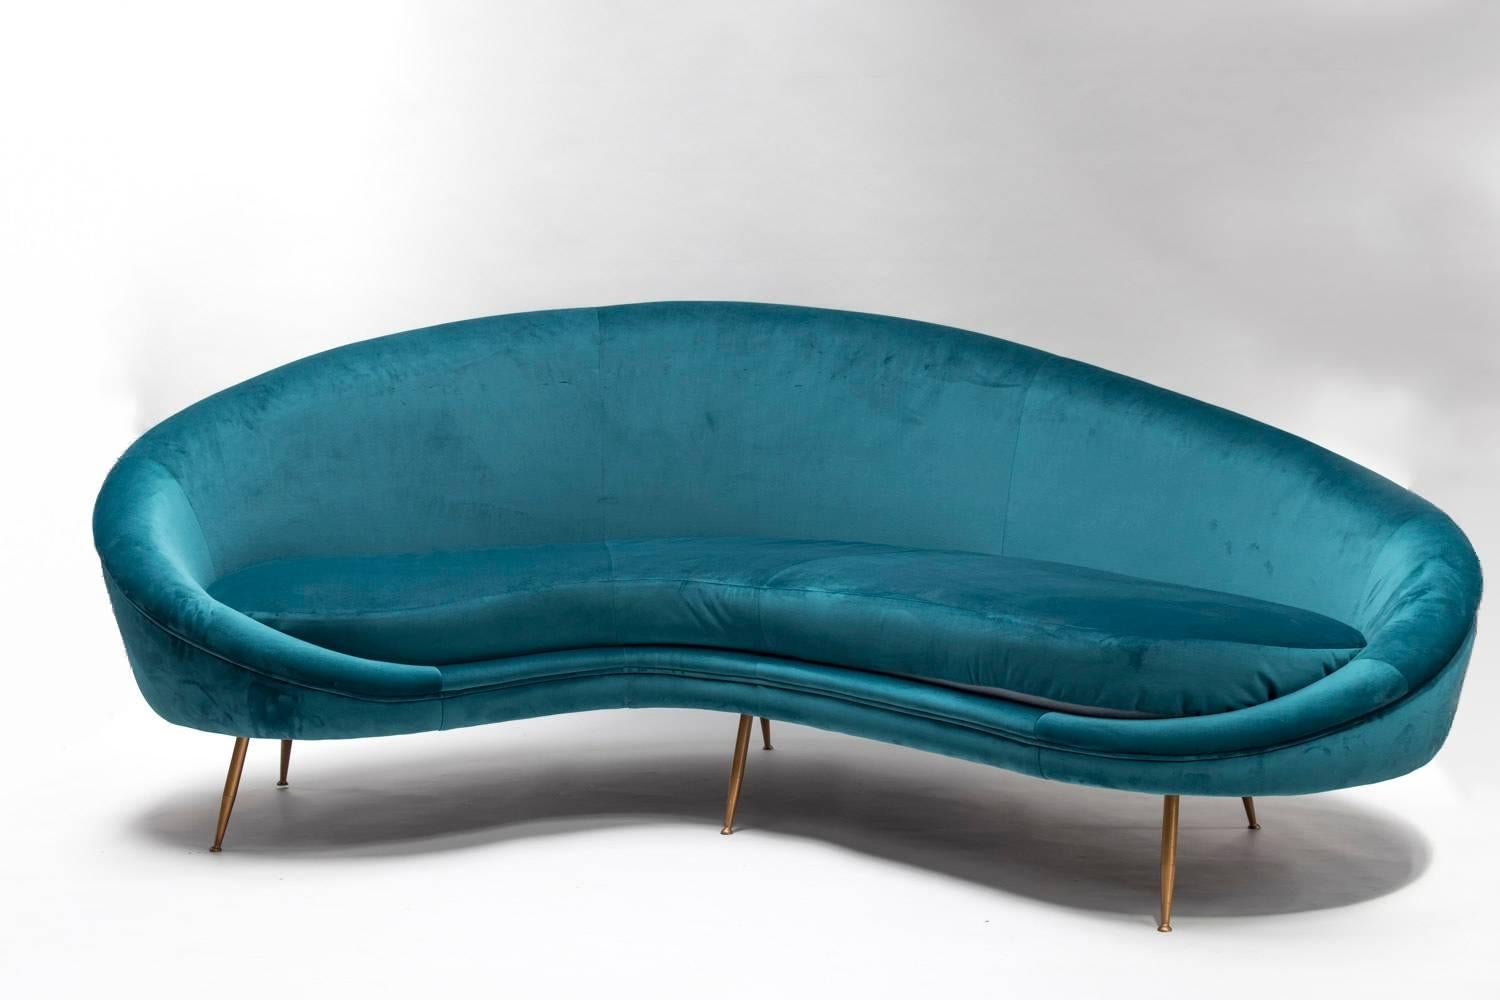 Peacock blue velvet sofa in the style of the 1950s.
Nice curved 